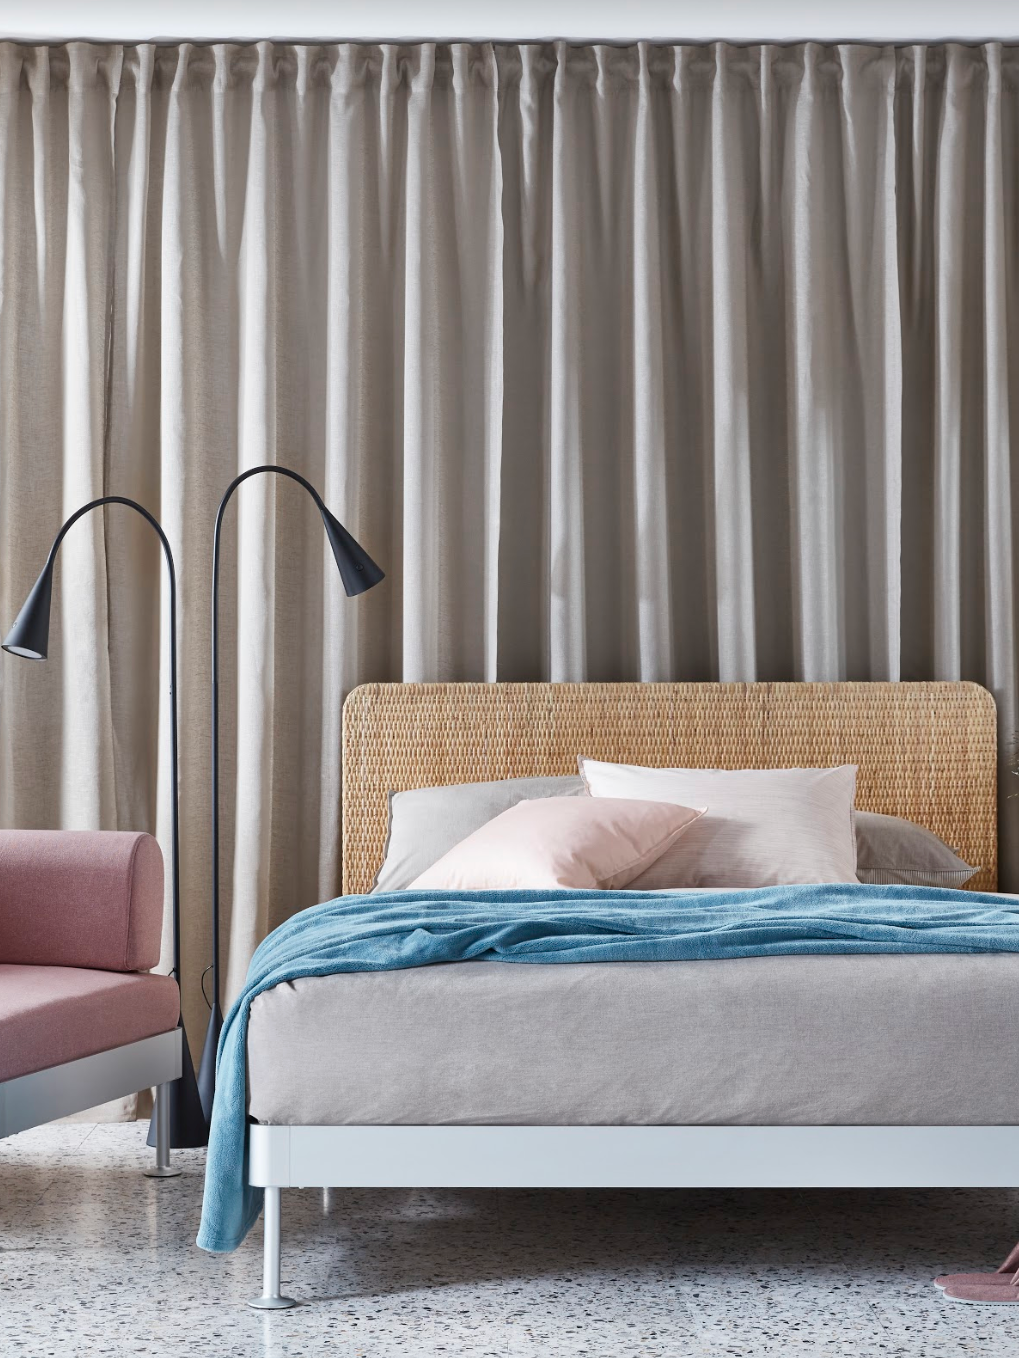 First Look: The Ikea x Tom Dixon Bedroom Collaboration Is Here